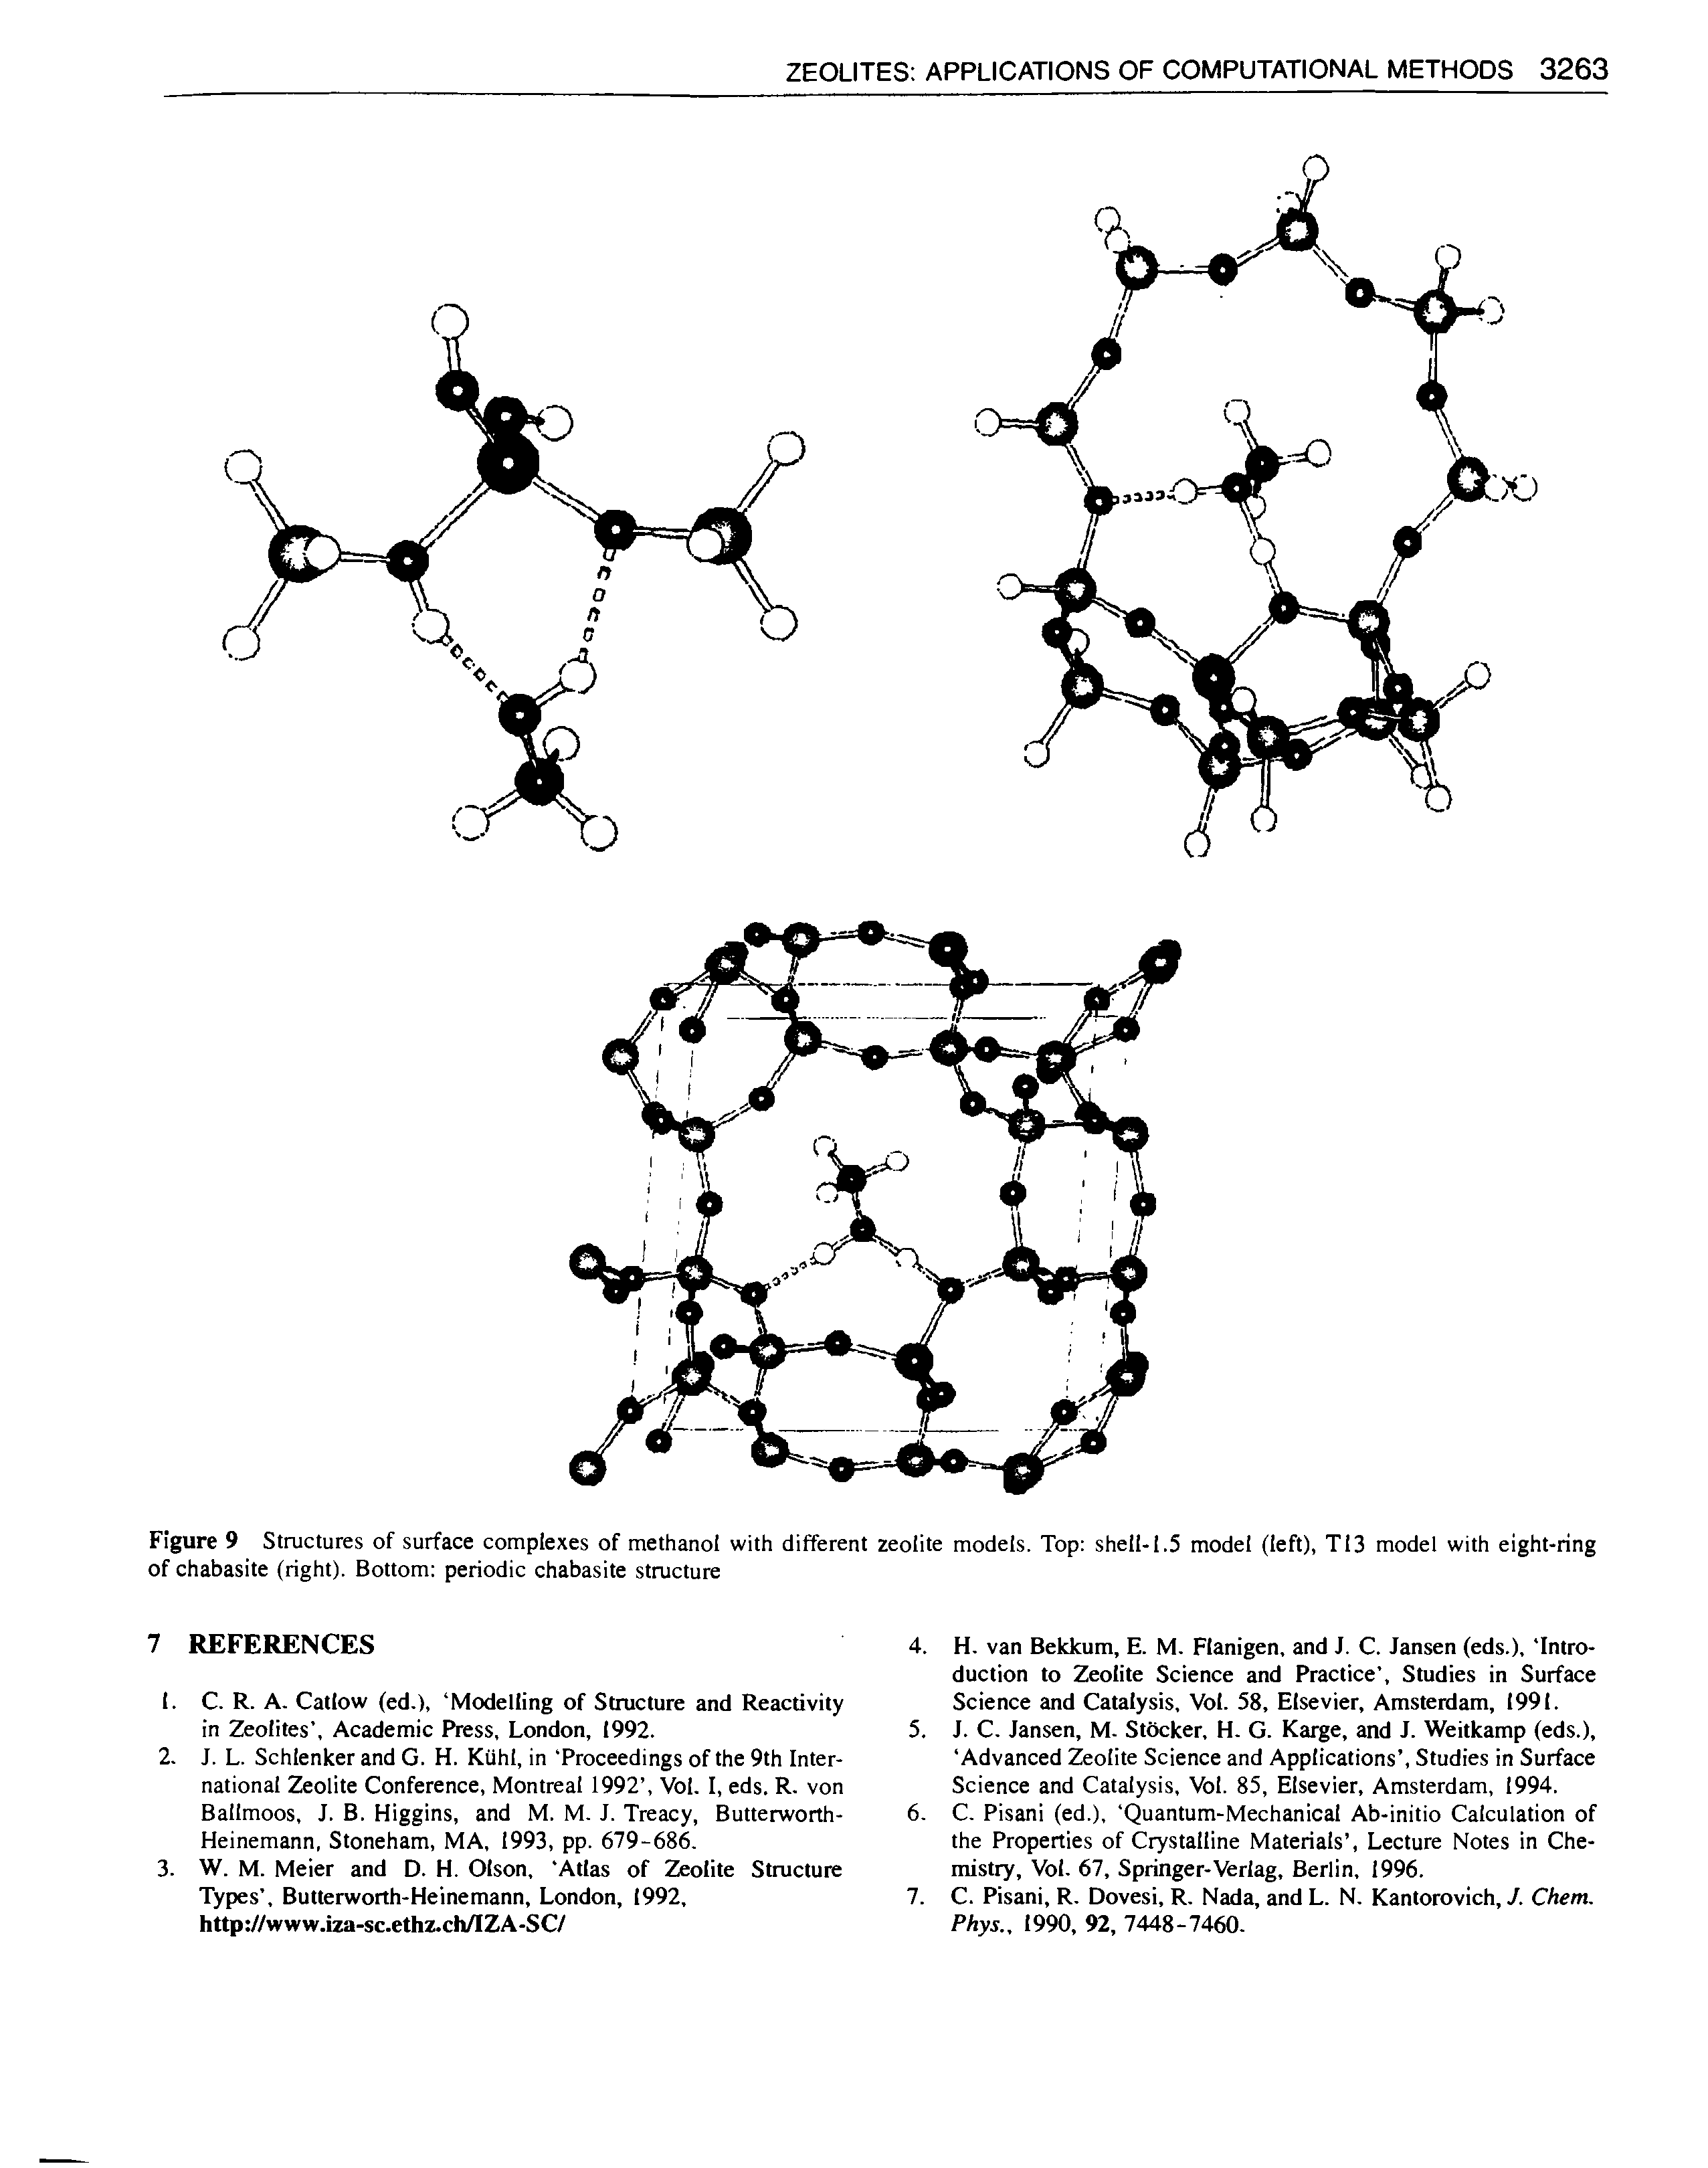 Figure 9 Structures of surface complexes of methanol with different zeolite models. Top shell-1.5 model (left), TI3 model with eight-ring of chabasite (right). Bottom periodic chabasite structure...